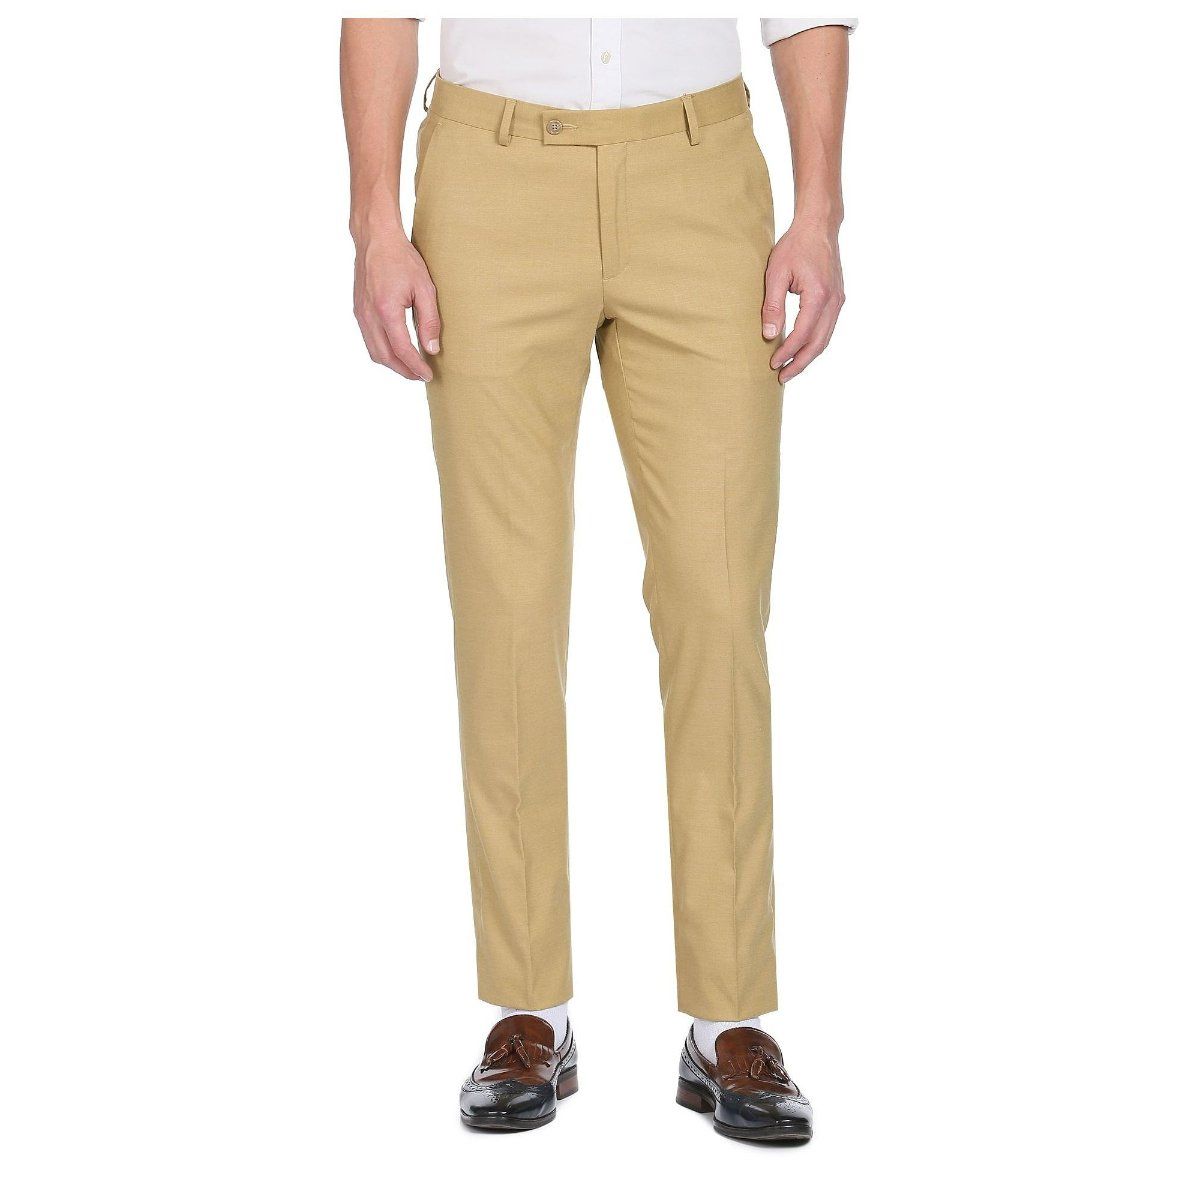 Arrow Men Khaki Regular Fit Solid Formal Trousers Buy Arrow Men Khaki  Regular Fit Solid Formal Trousers Online at Best Price in India  NykaaMan